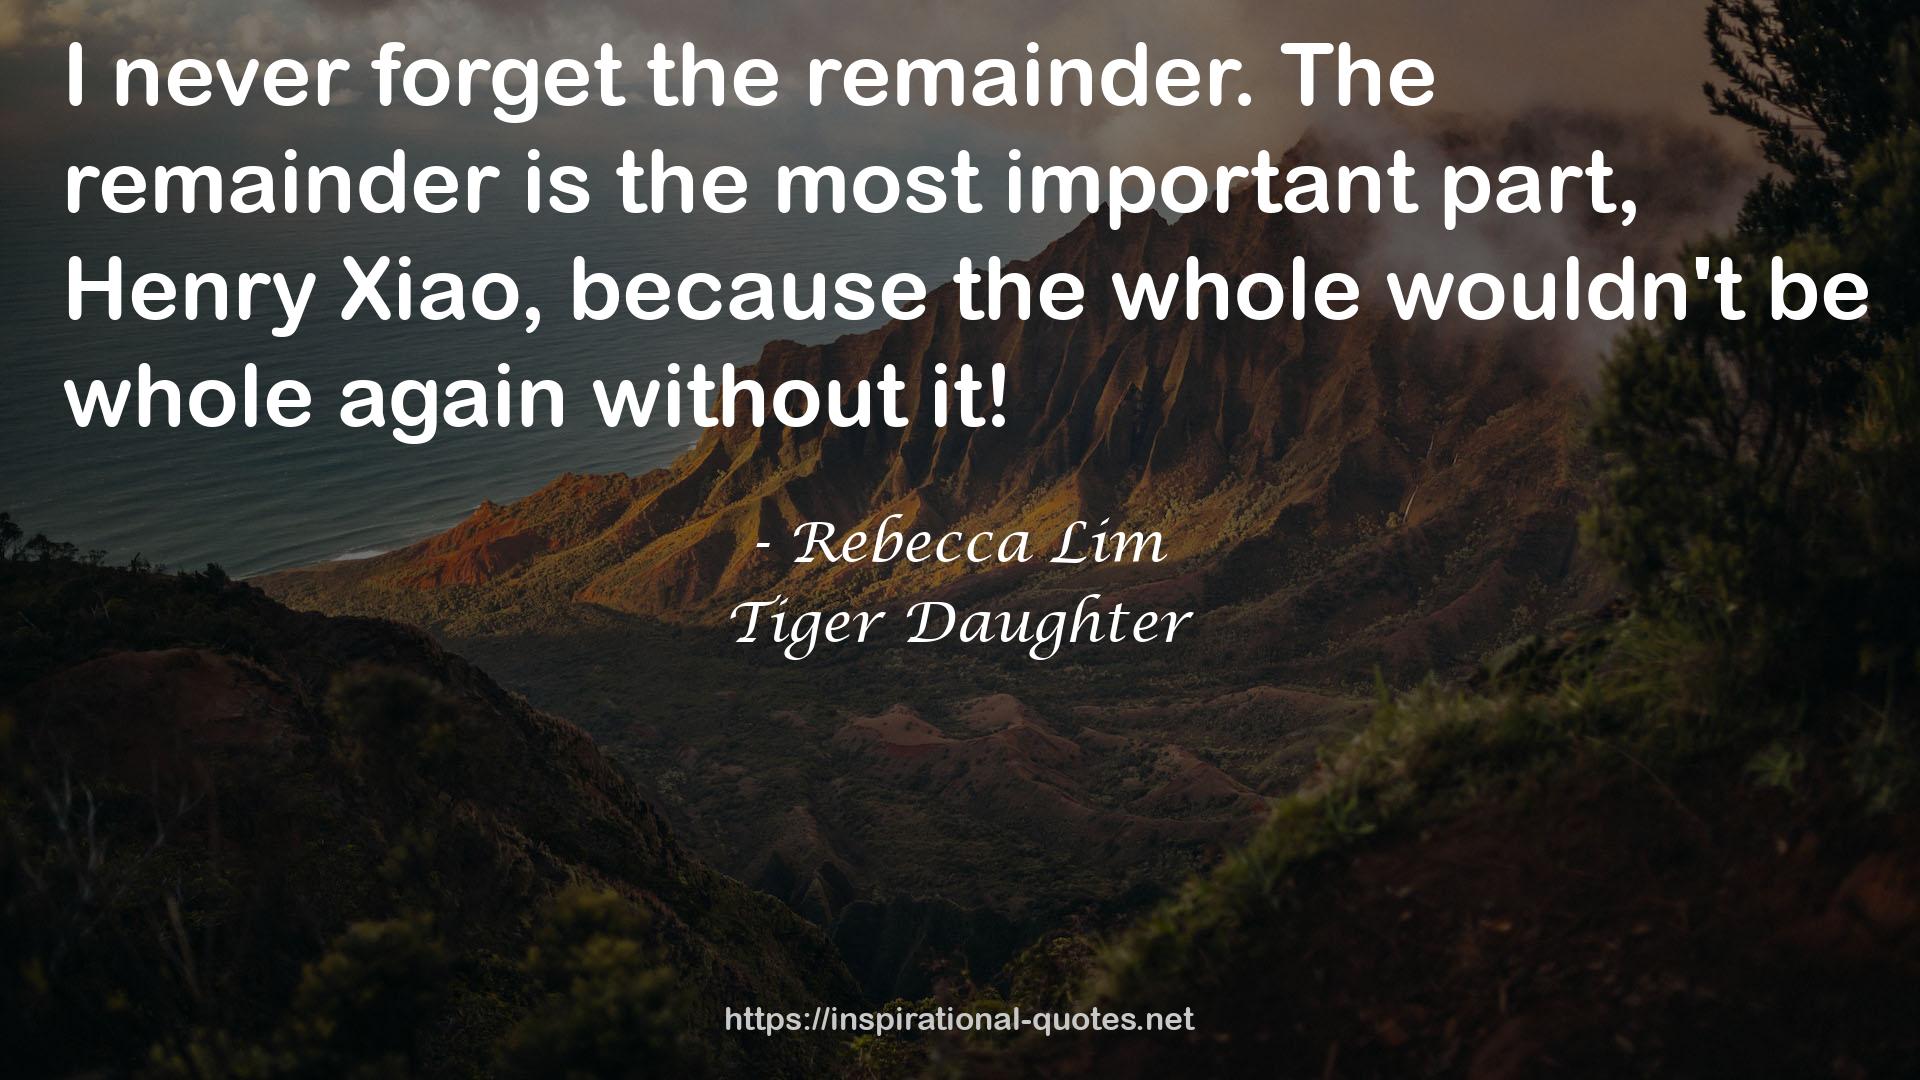 Tiger Daughter QUOTES